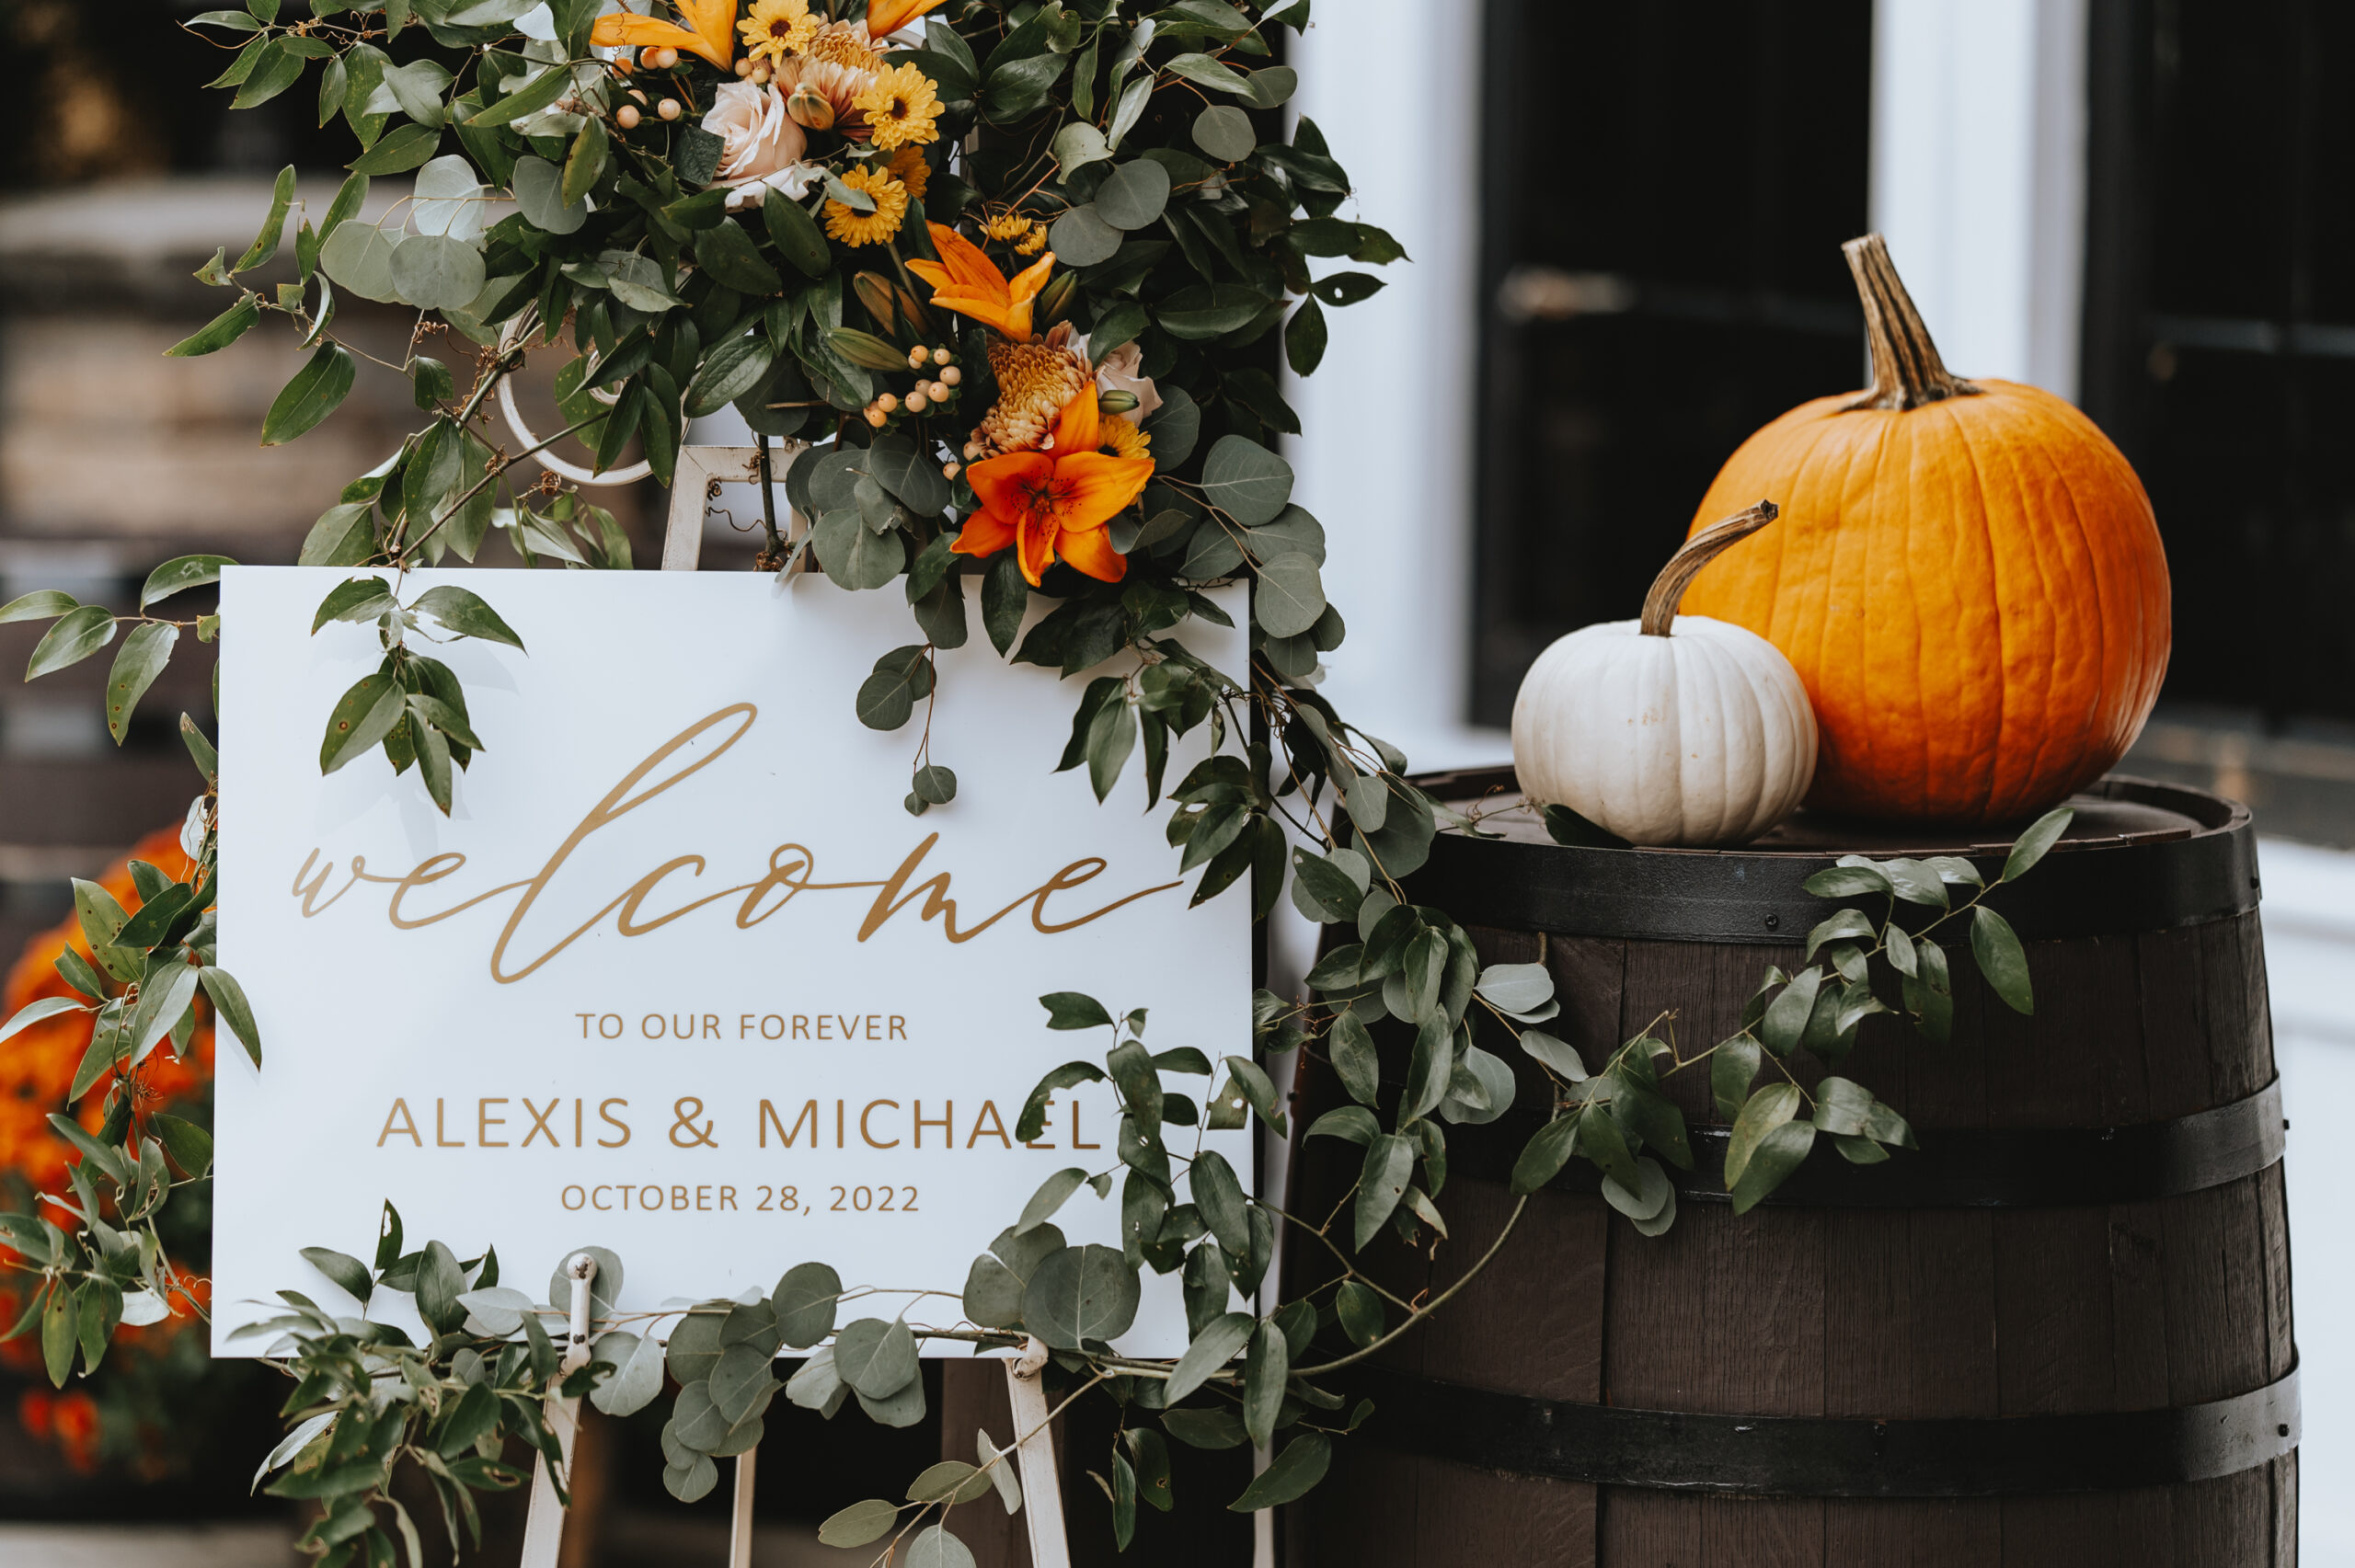 The welcome sign table features pumpkins for this fall-themed Hamilton Manor wedding.